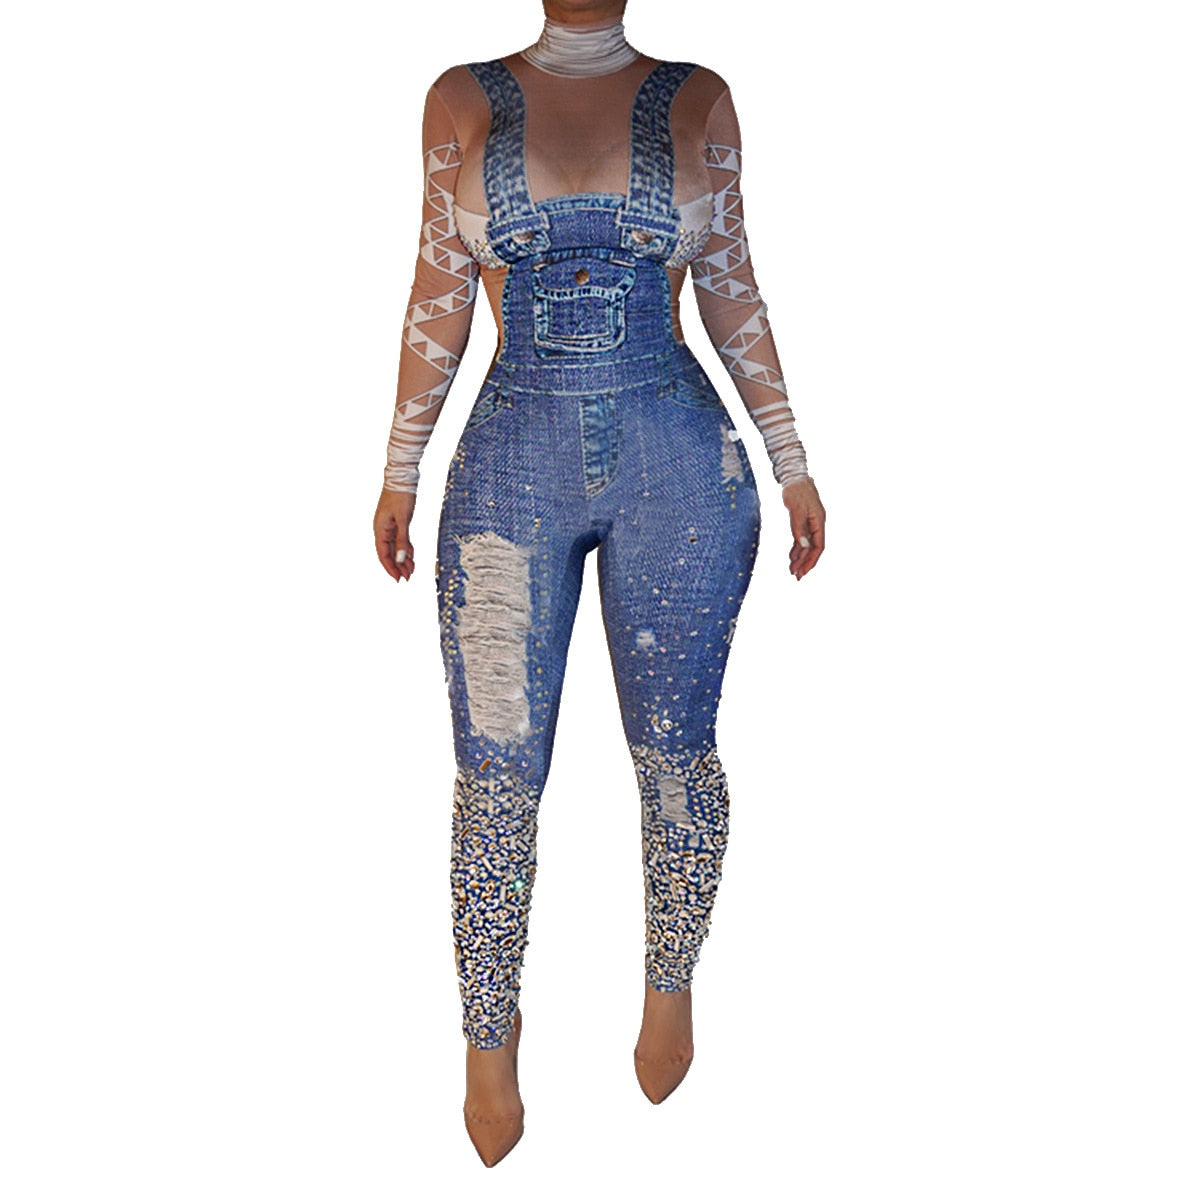 Women Fashion Sexy Plus Size Print Jeans Rompers Strap Pocket Denim Casual Loose Jumpsuit Long Pants - TRIPLE AAA Fashion Collection